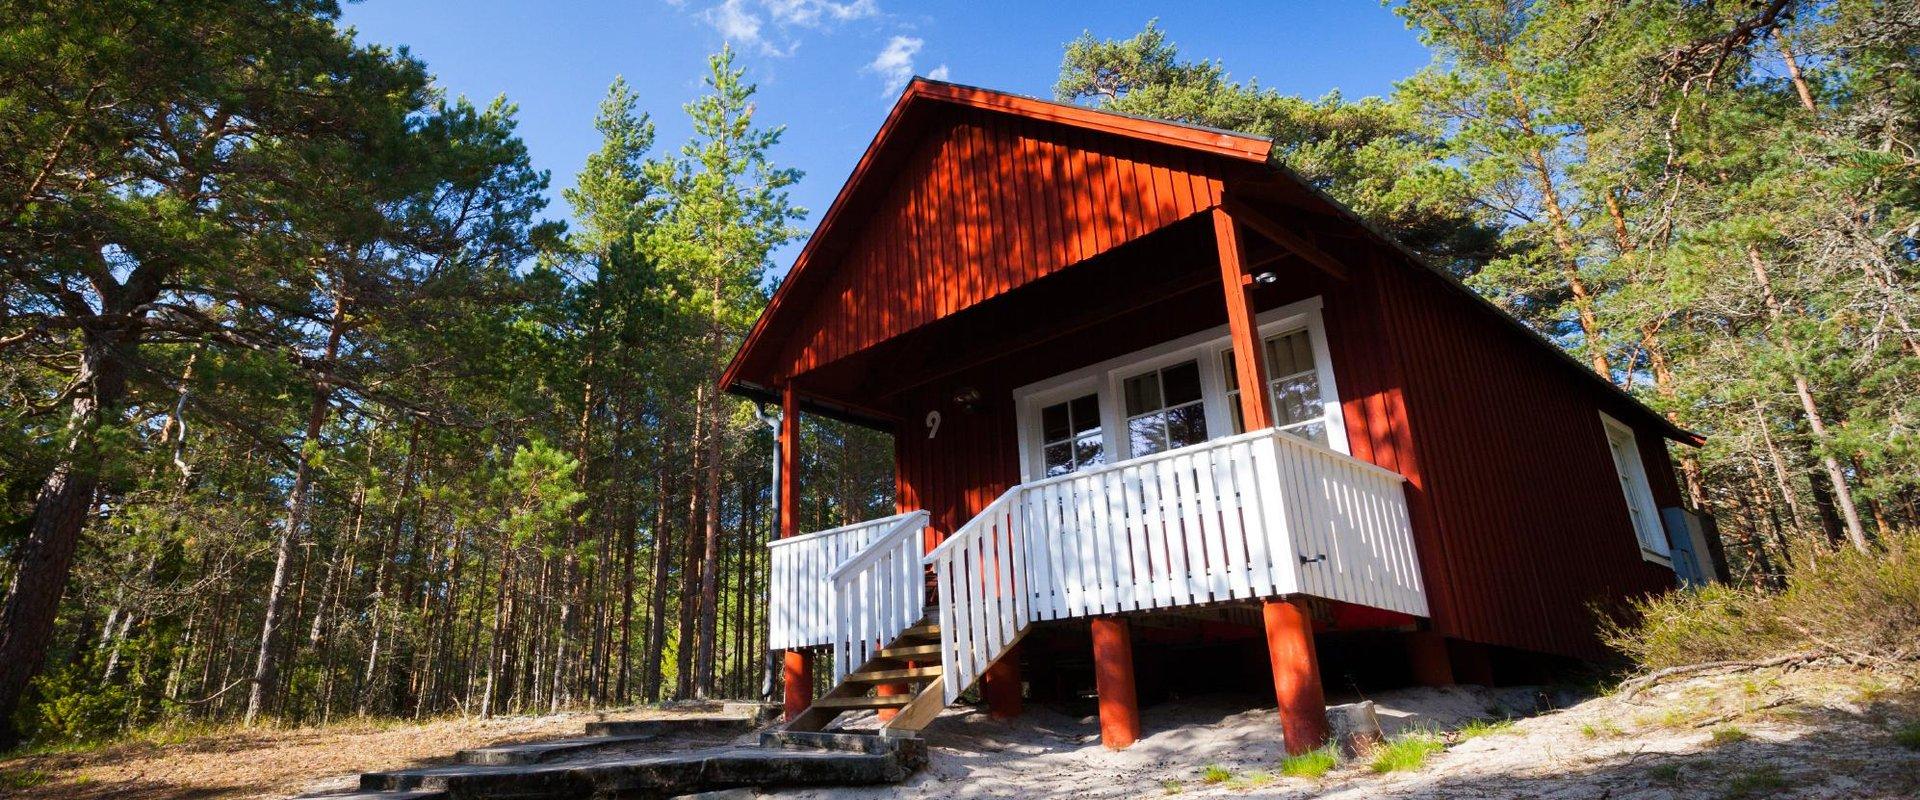 Roosta Holiday Village is set amidst the beautiful nature of Lääne County and boasts both experience and quality of service. It is the perfect place f